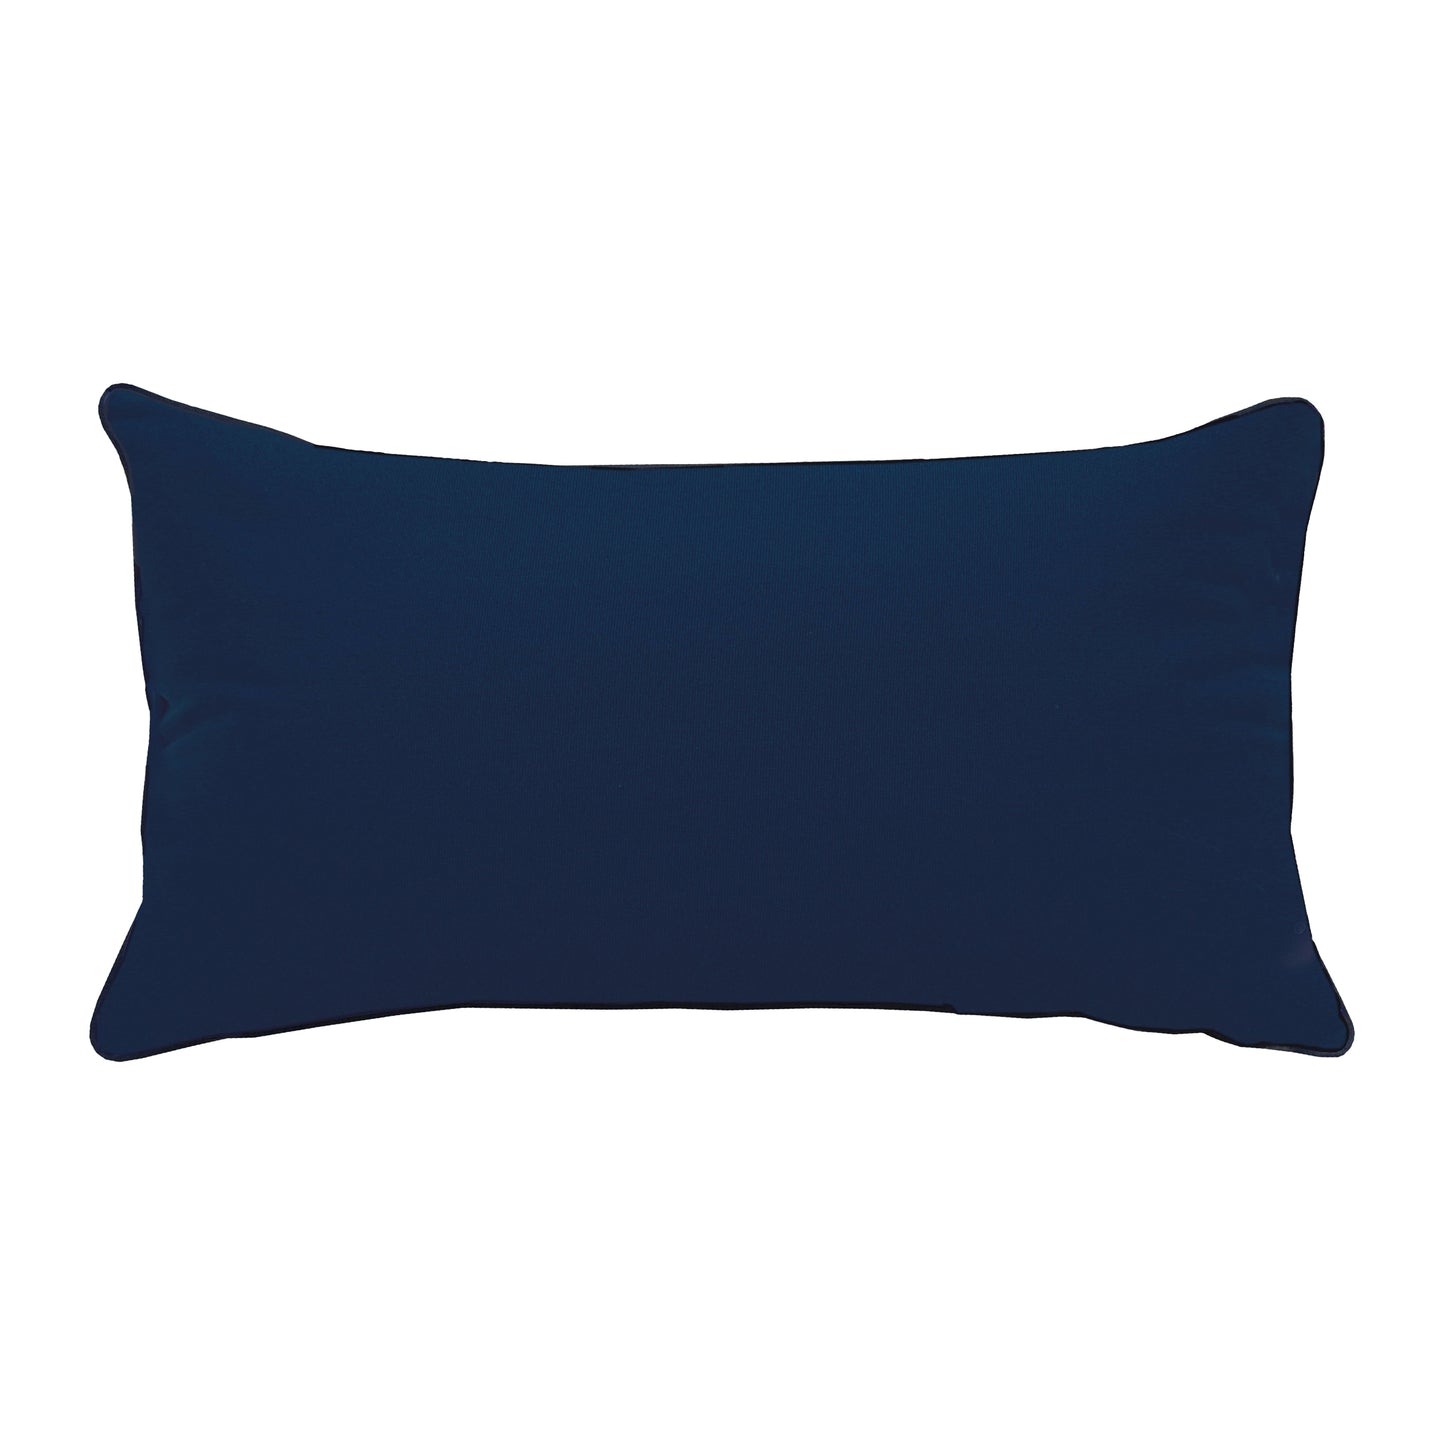 Solid navy blue fabric; the back side of the Octopus Tentacles Indoor Outdoor pillow.